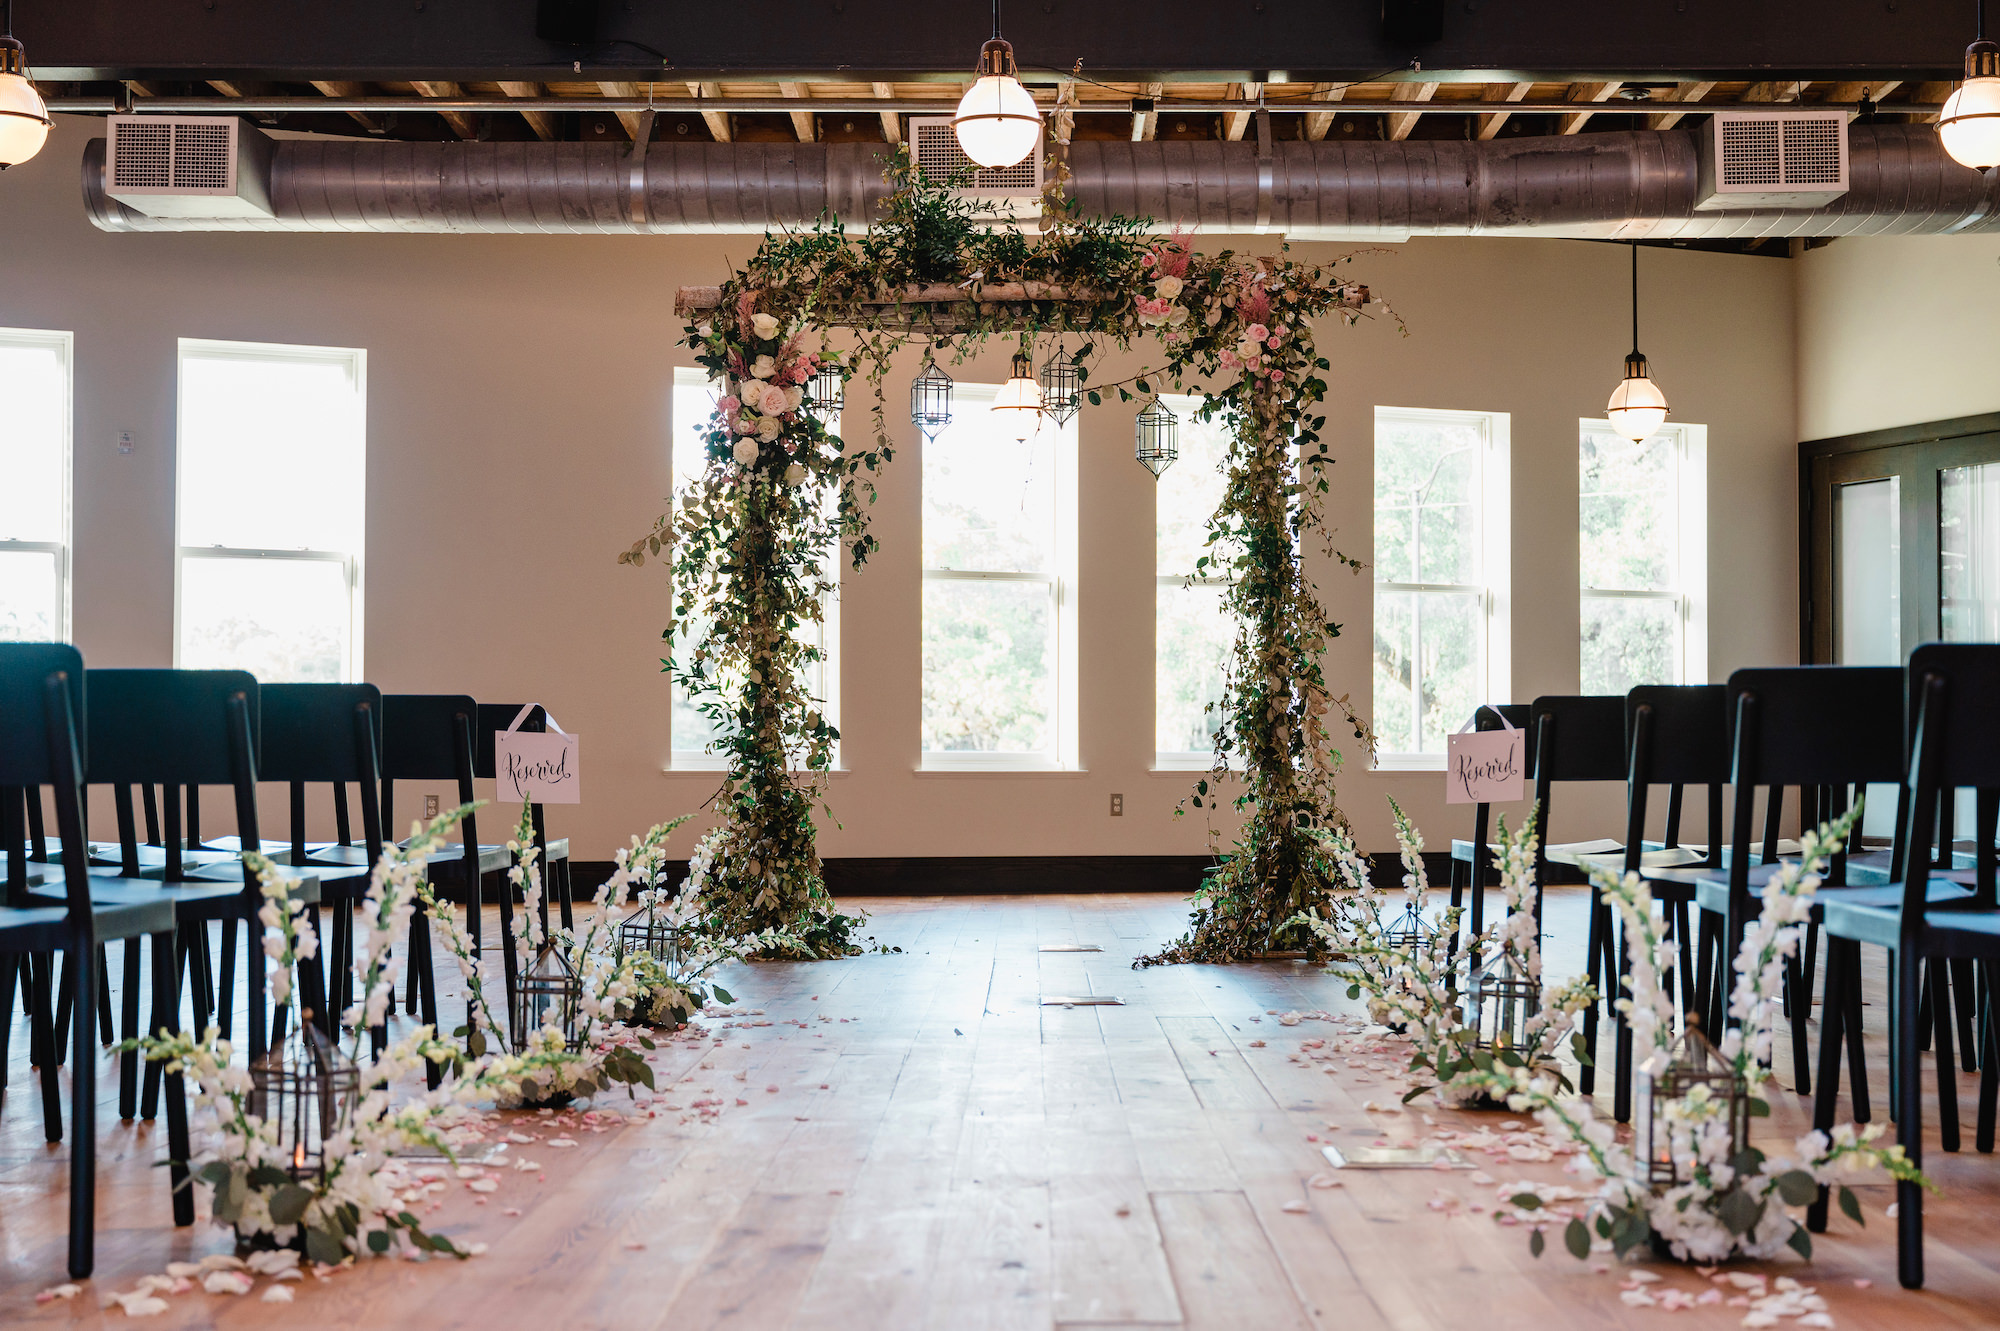 Indoor Spring Garden Wedding Ceremony Ideas | Blush Pink Rose and Greenery Wedding Arch And Aisle Floral Arrangements